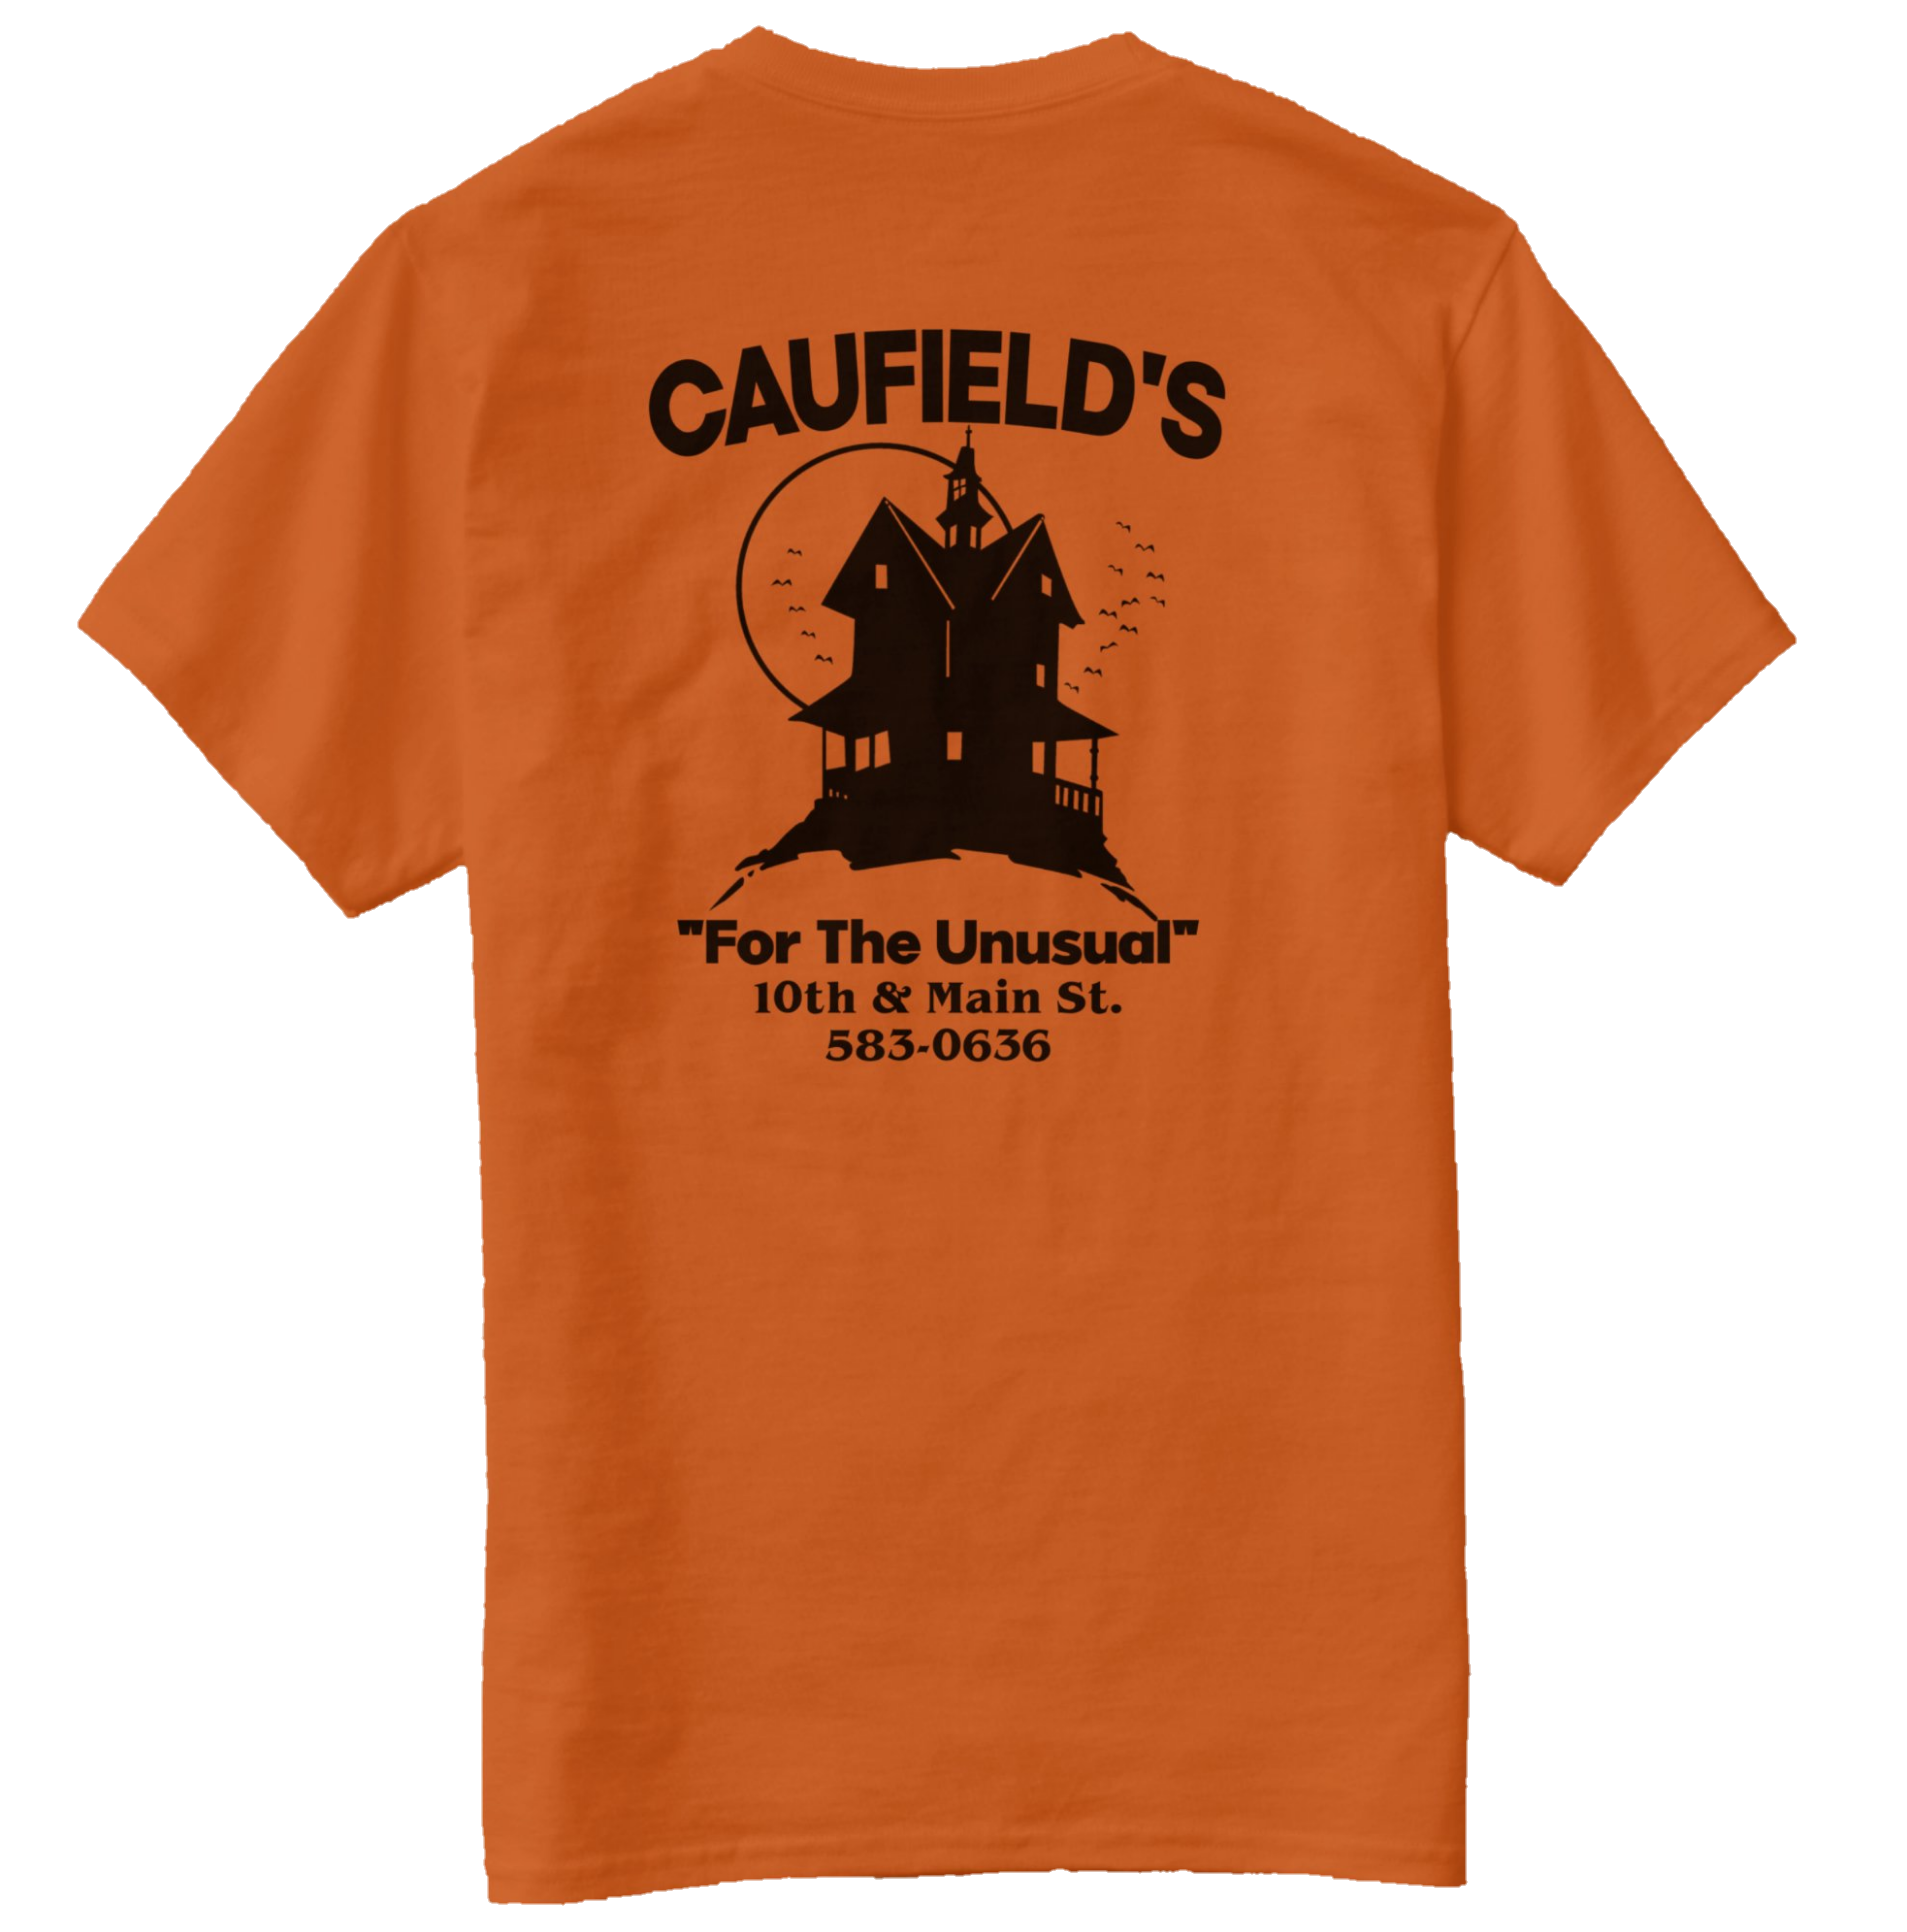 Caufield's Novelty 90's Throwback! Haunted House T-Shirt